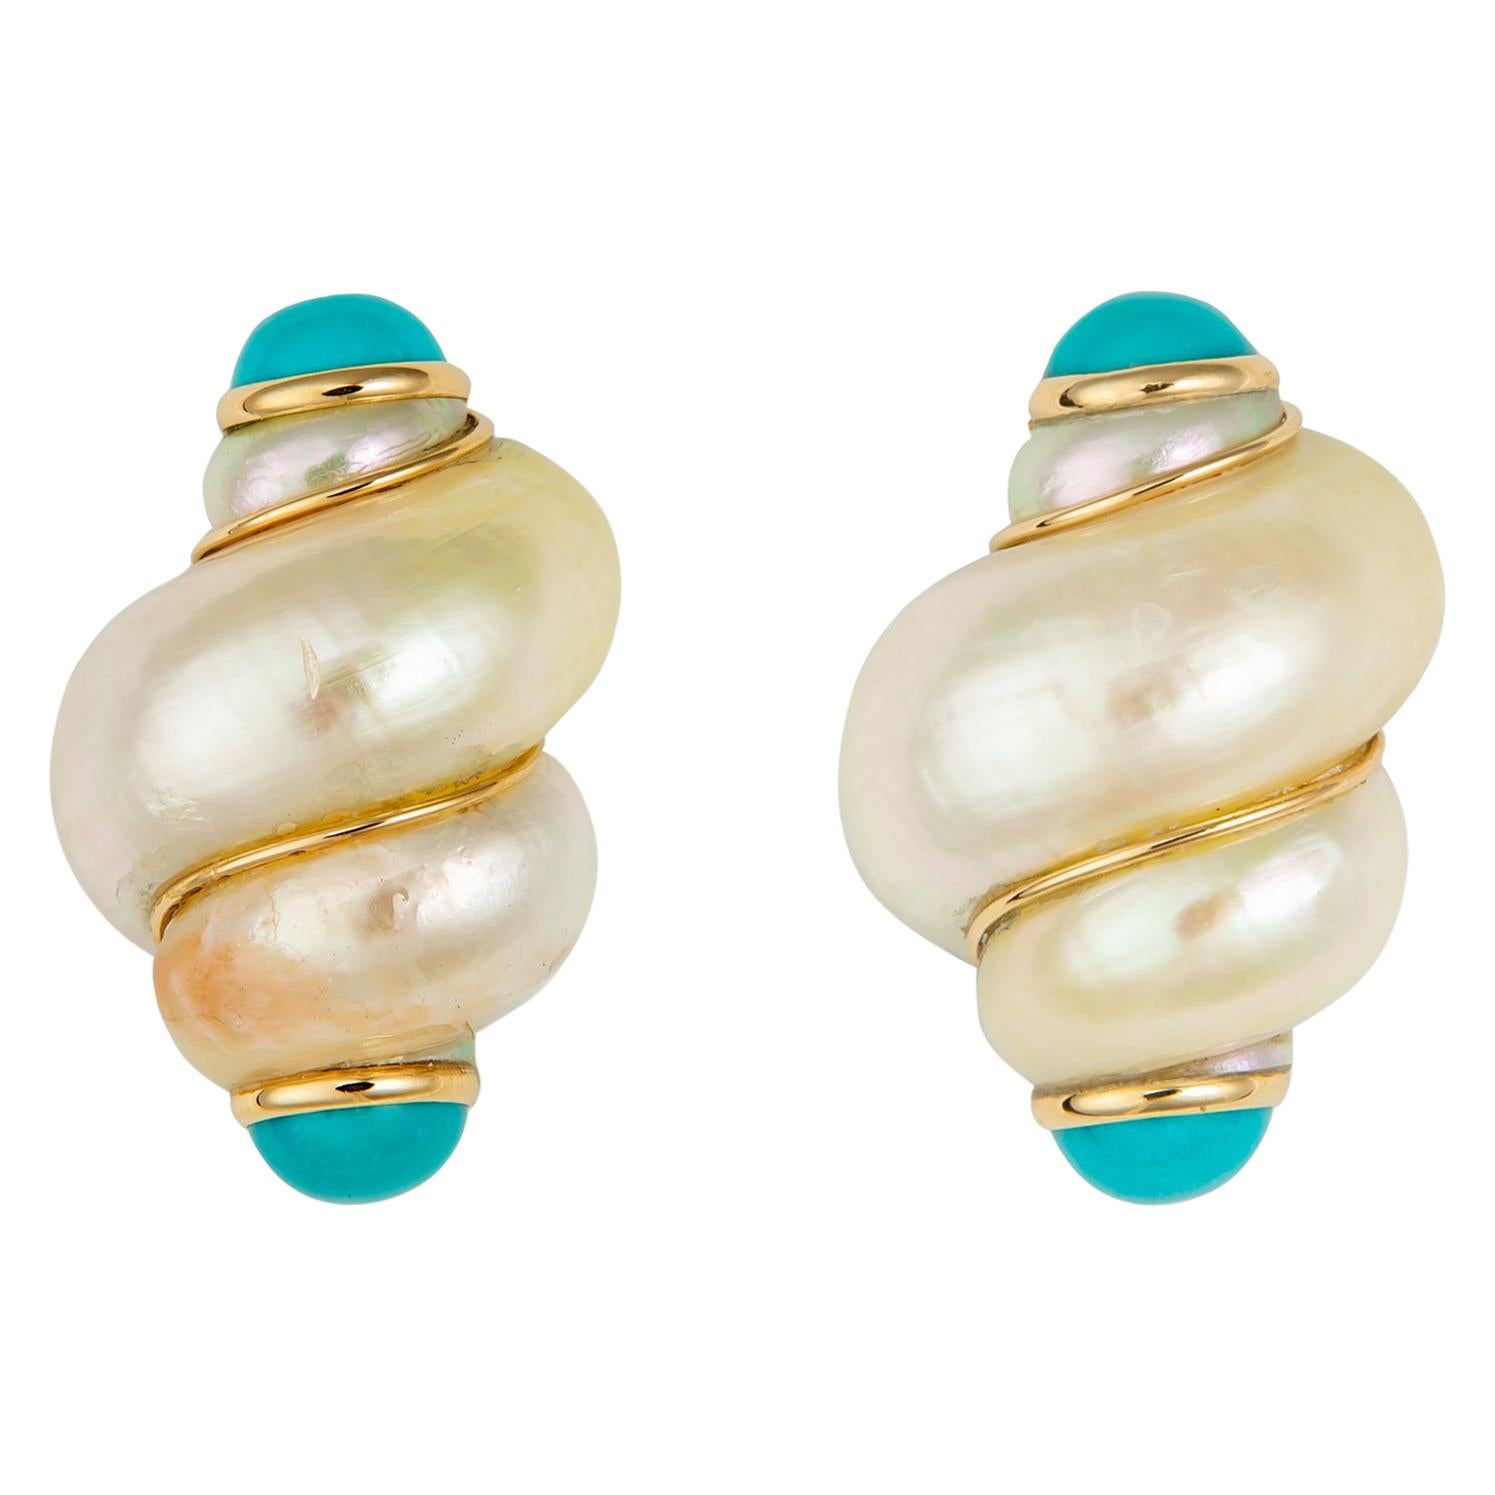 Mazza Bros. Turbo Shell and Turquoise Earrings